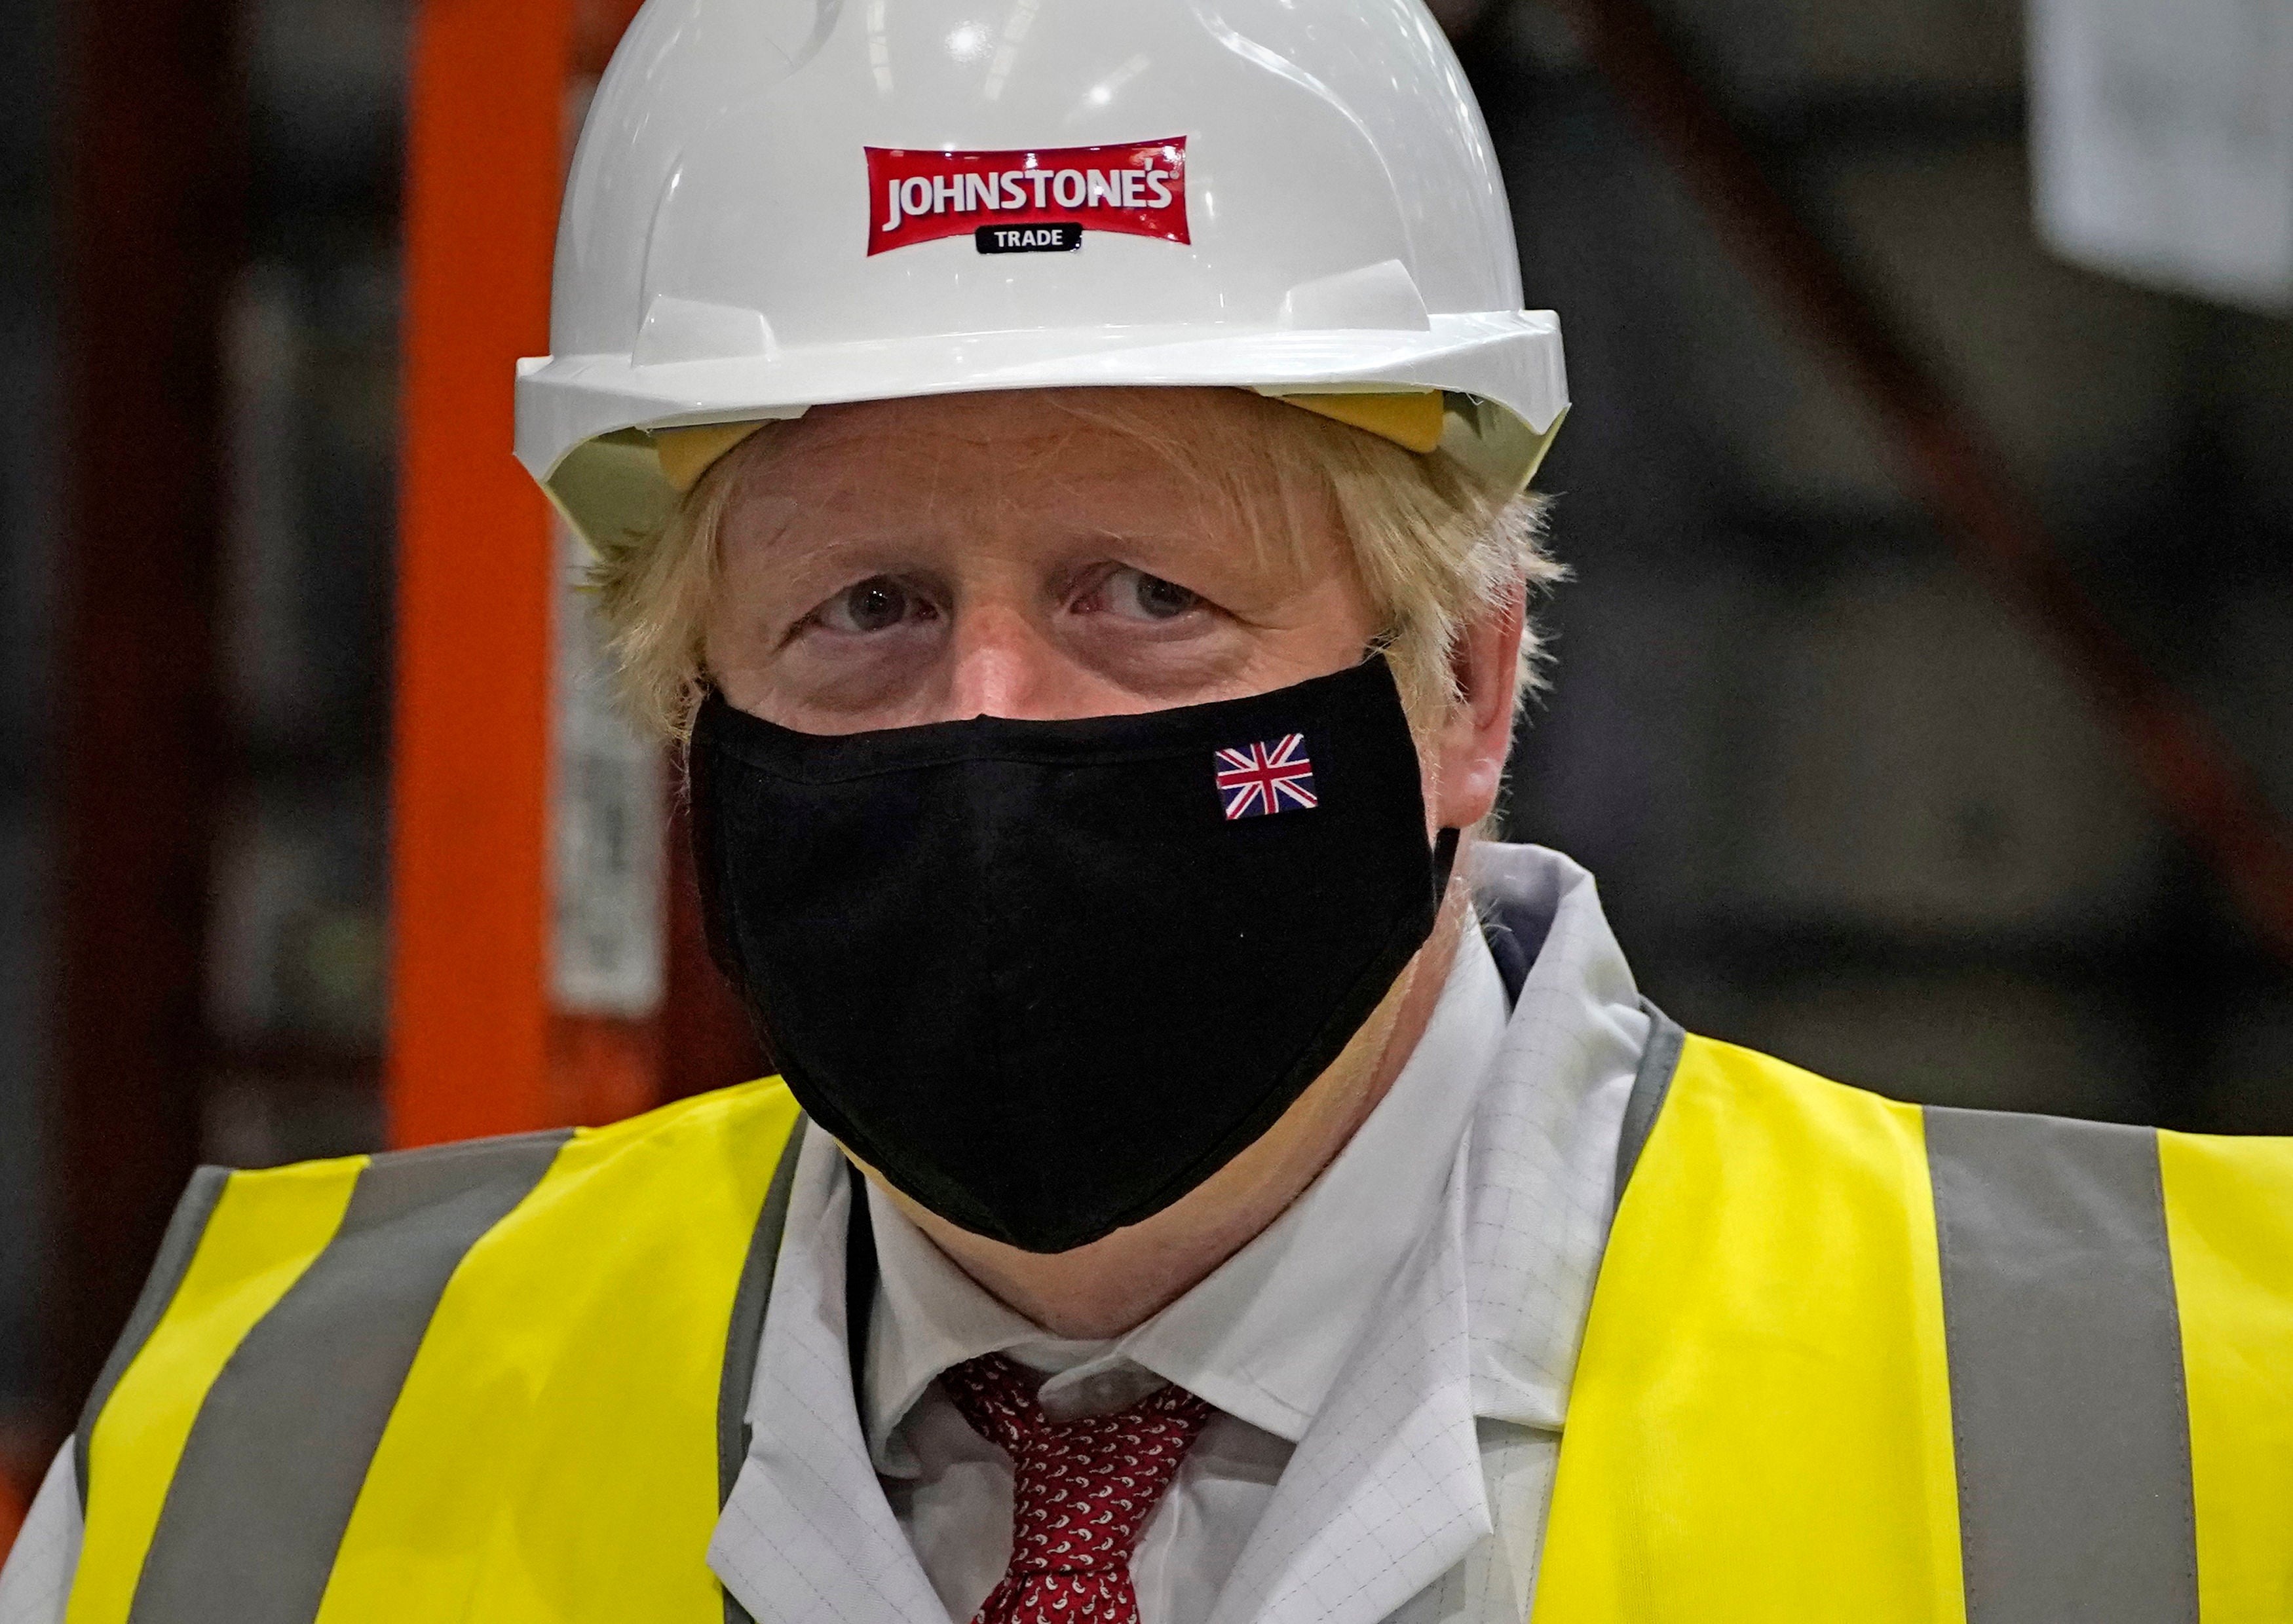 Boris Johnson during a visit to Johnstone’s Paints Limited in Batley, West Yorkshire, ahead of the Batley and Spen by-election